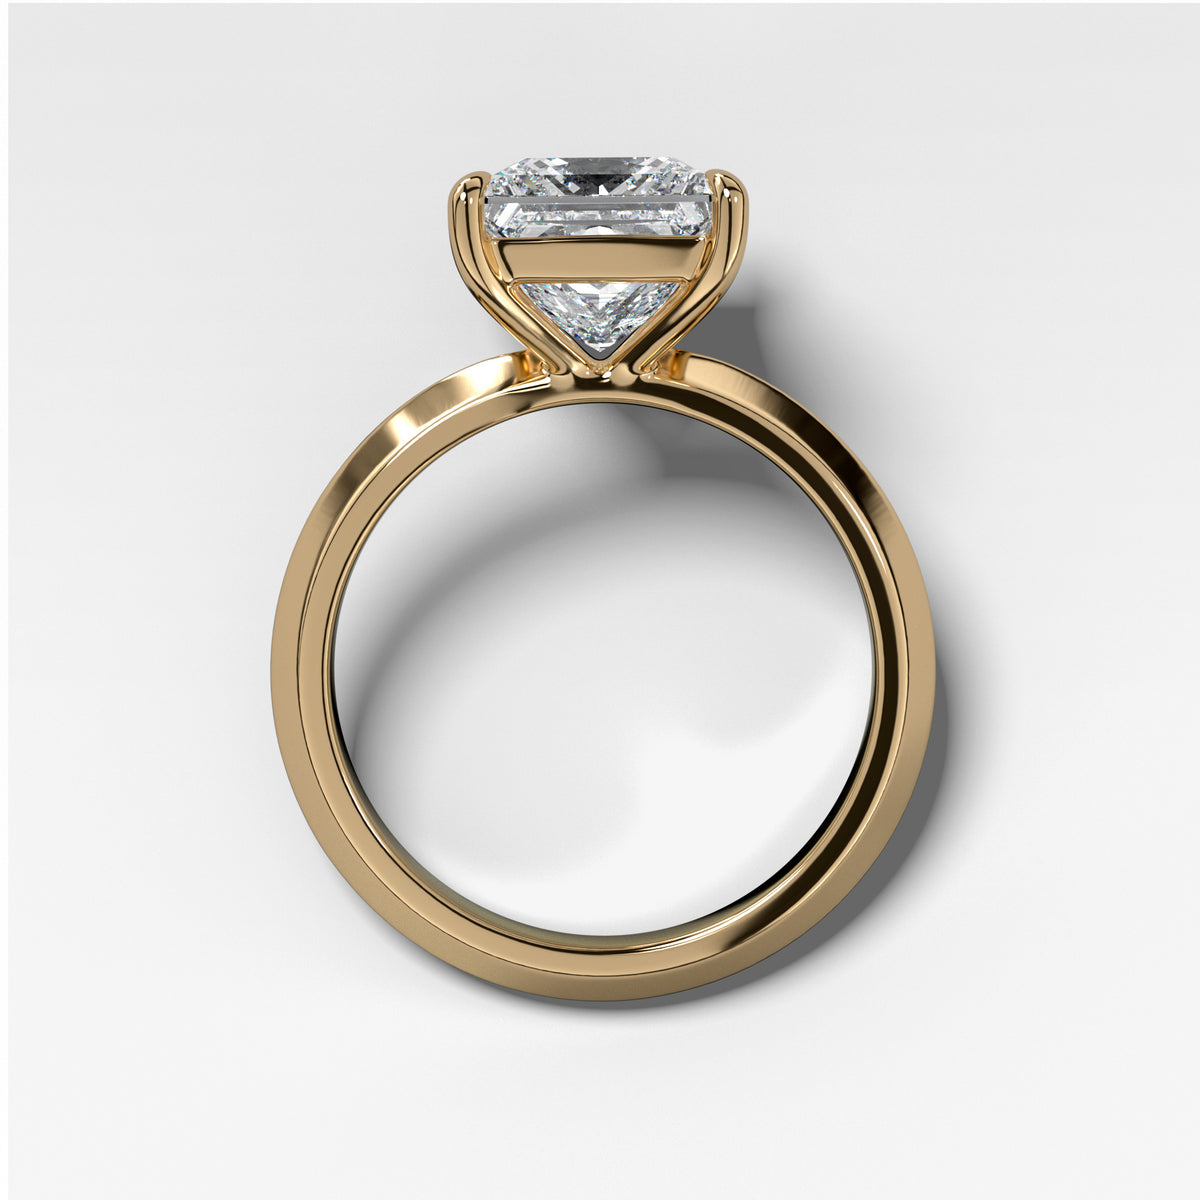 Butter Knife Solitaire Engagement Ring With Princess Cut Diamond